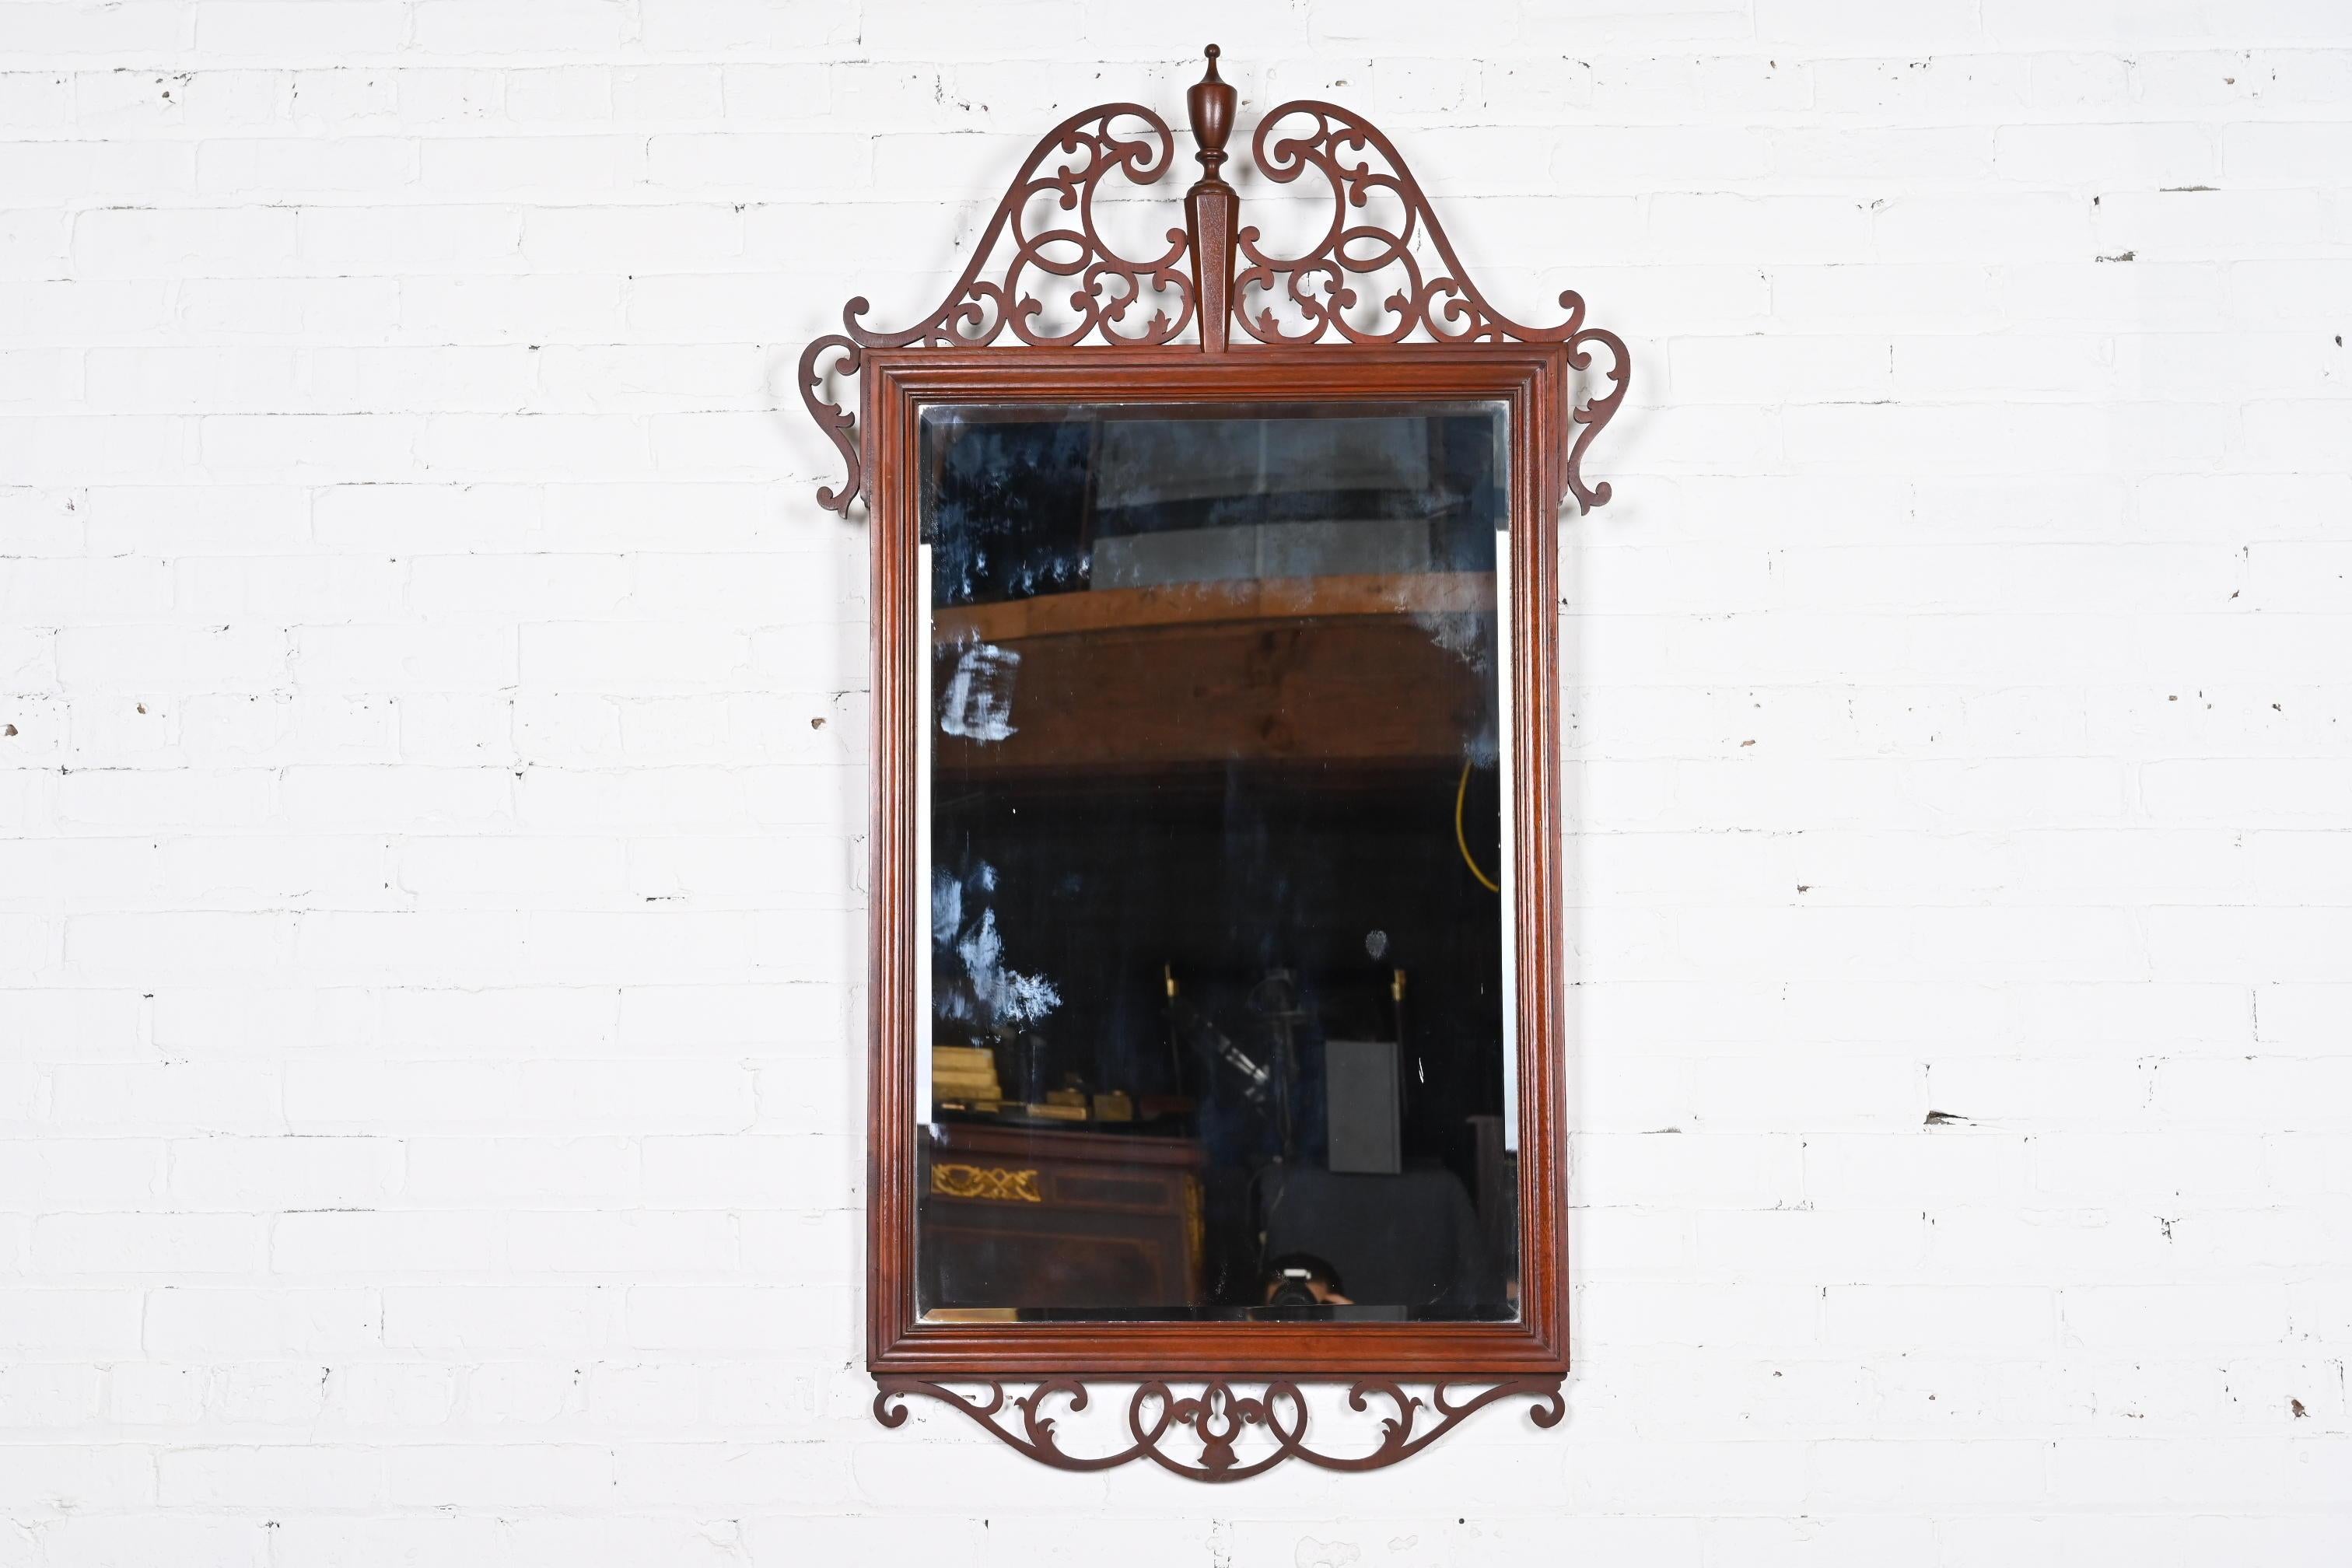 A stylish traditional Georgian or Chippendale style carved mahogany framed wall mirror

By Baker Furniture

USA, Late 20th Century

Measures: 30.5